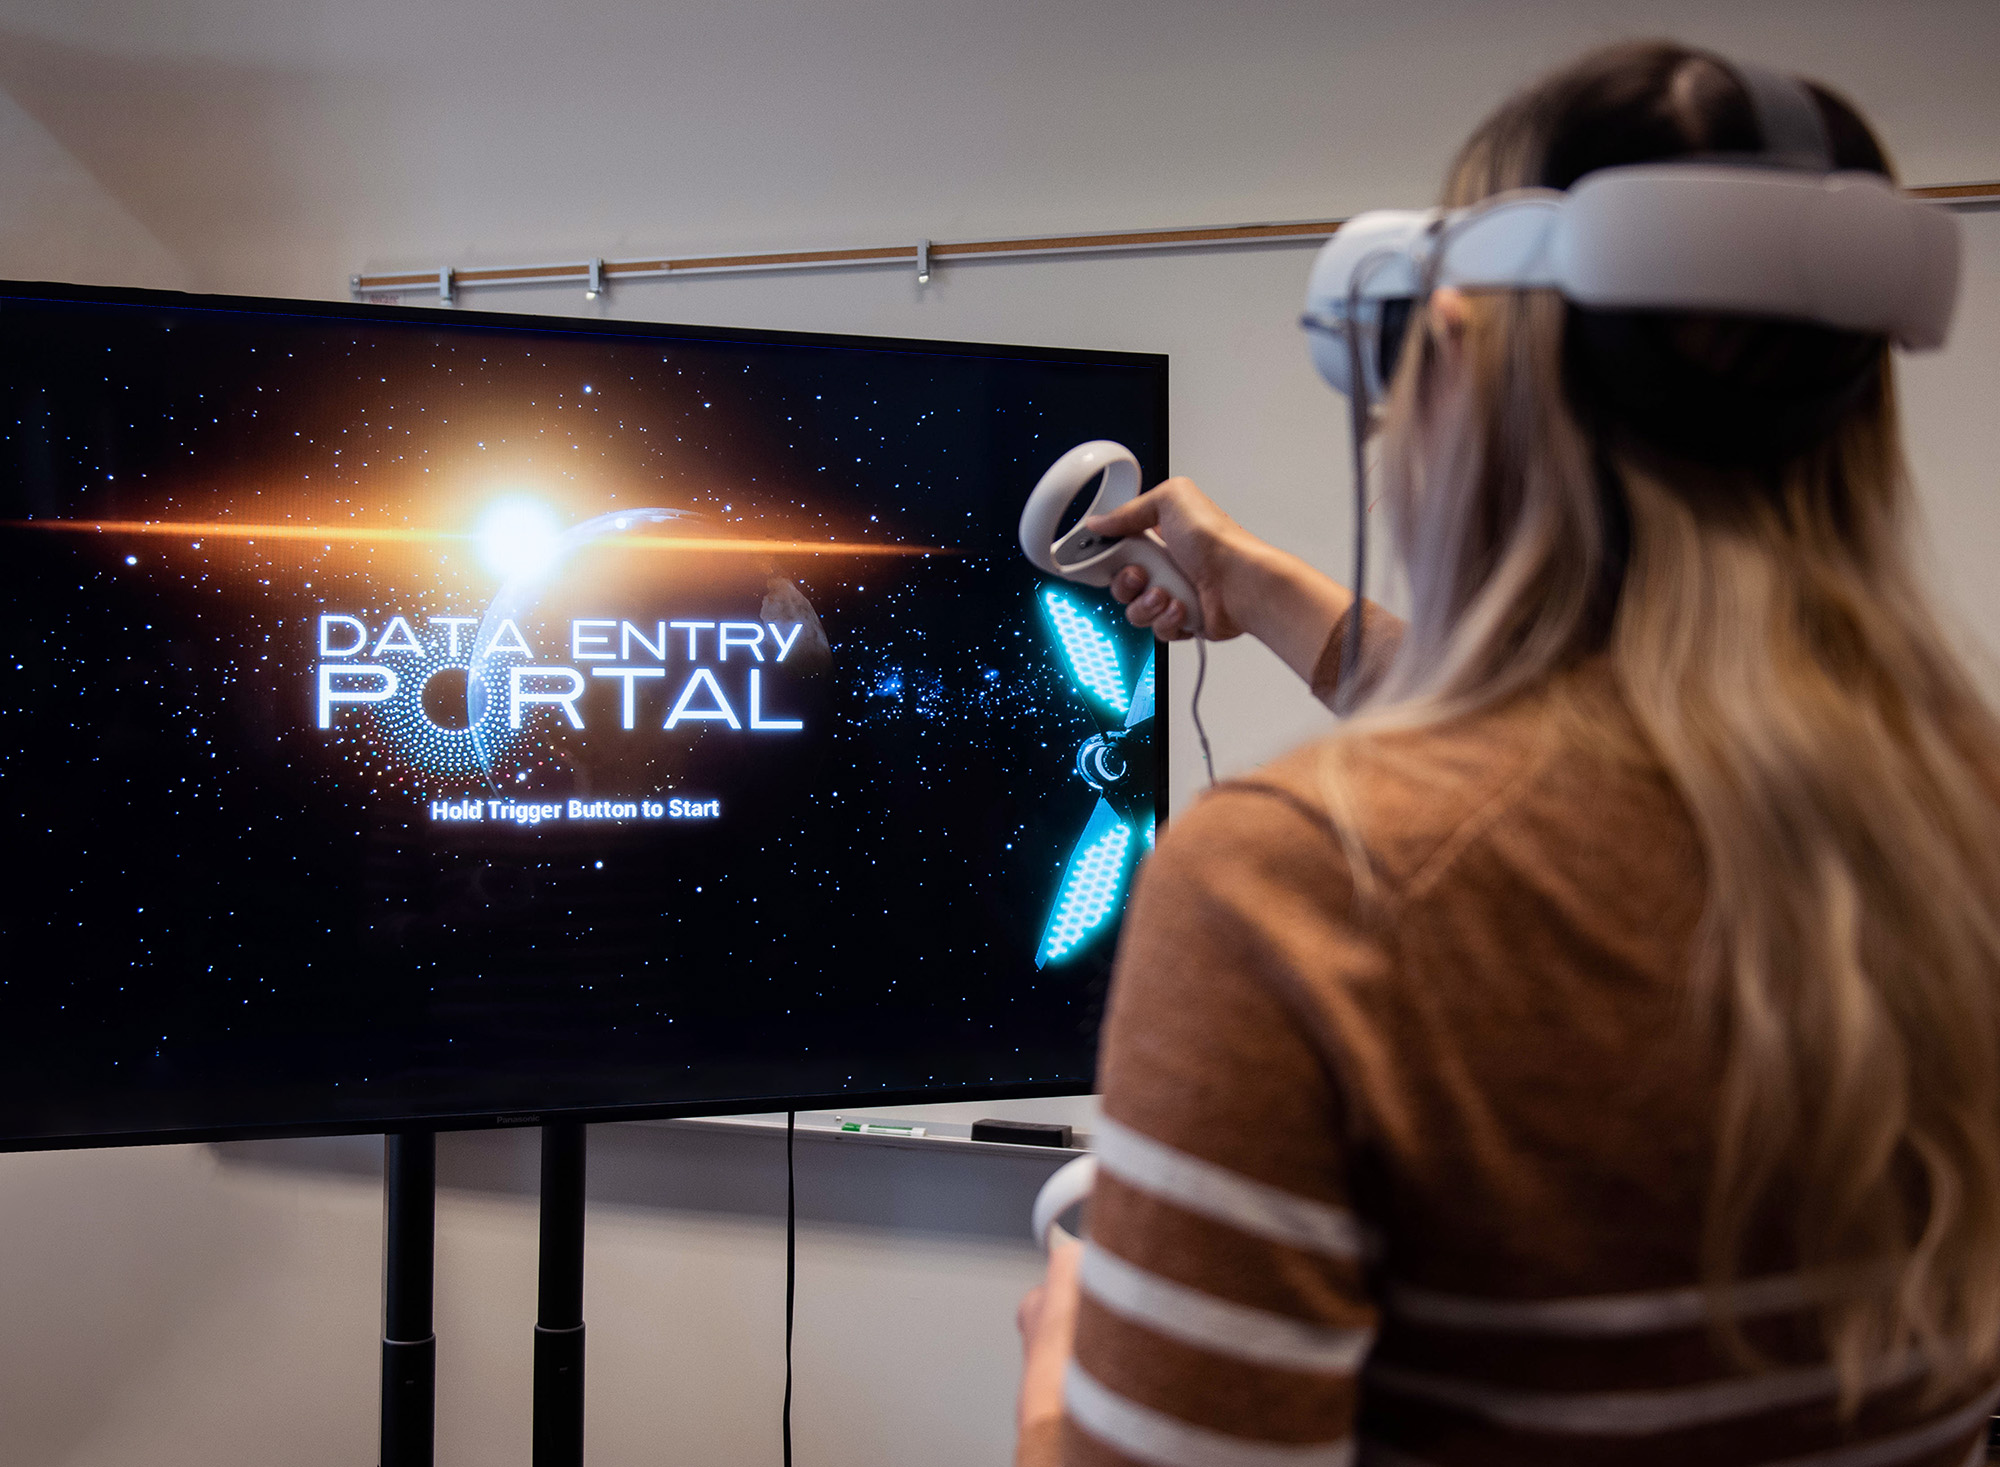 DATA ENTRY: PORTAL gameplay image